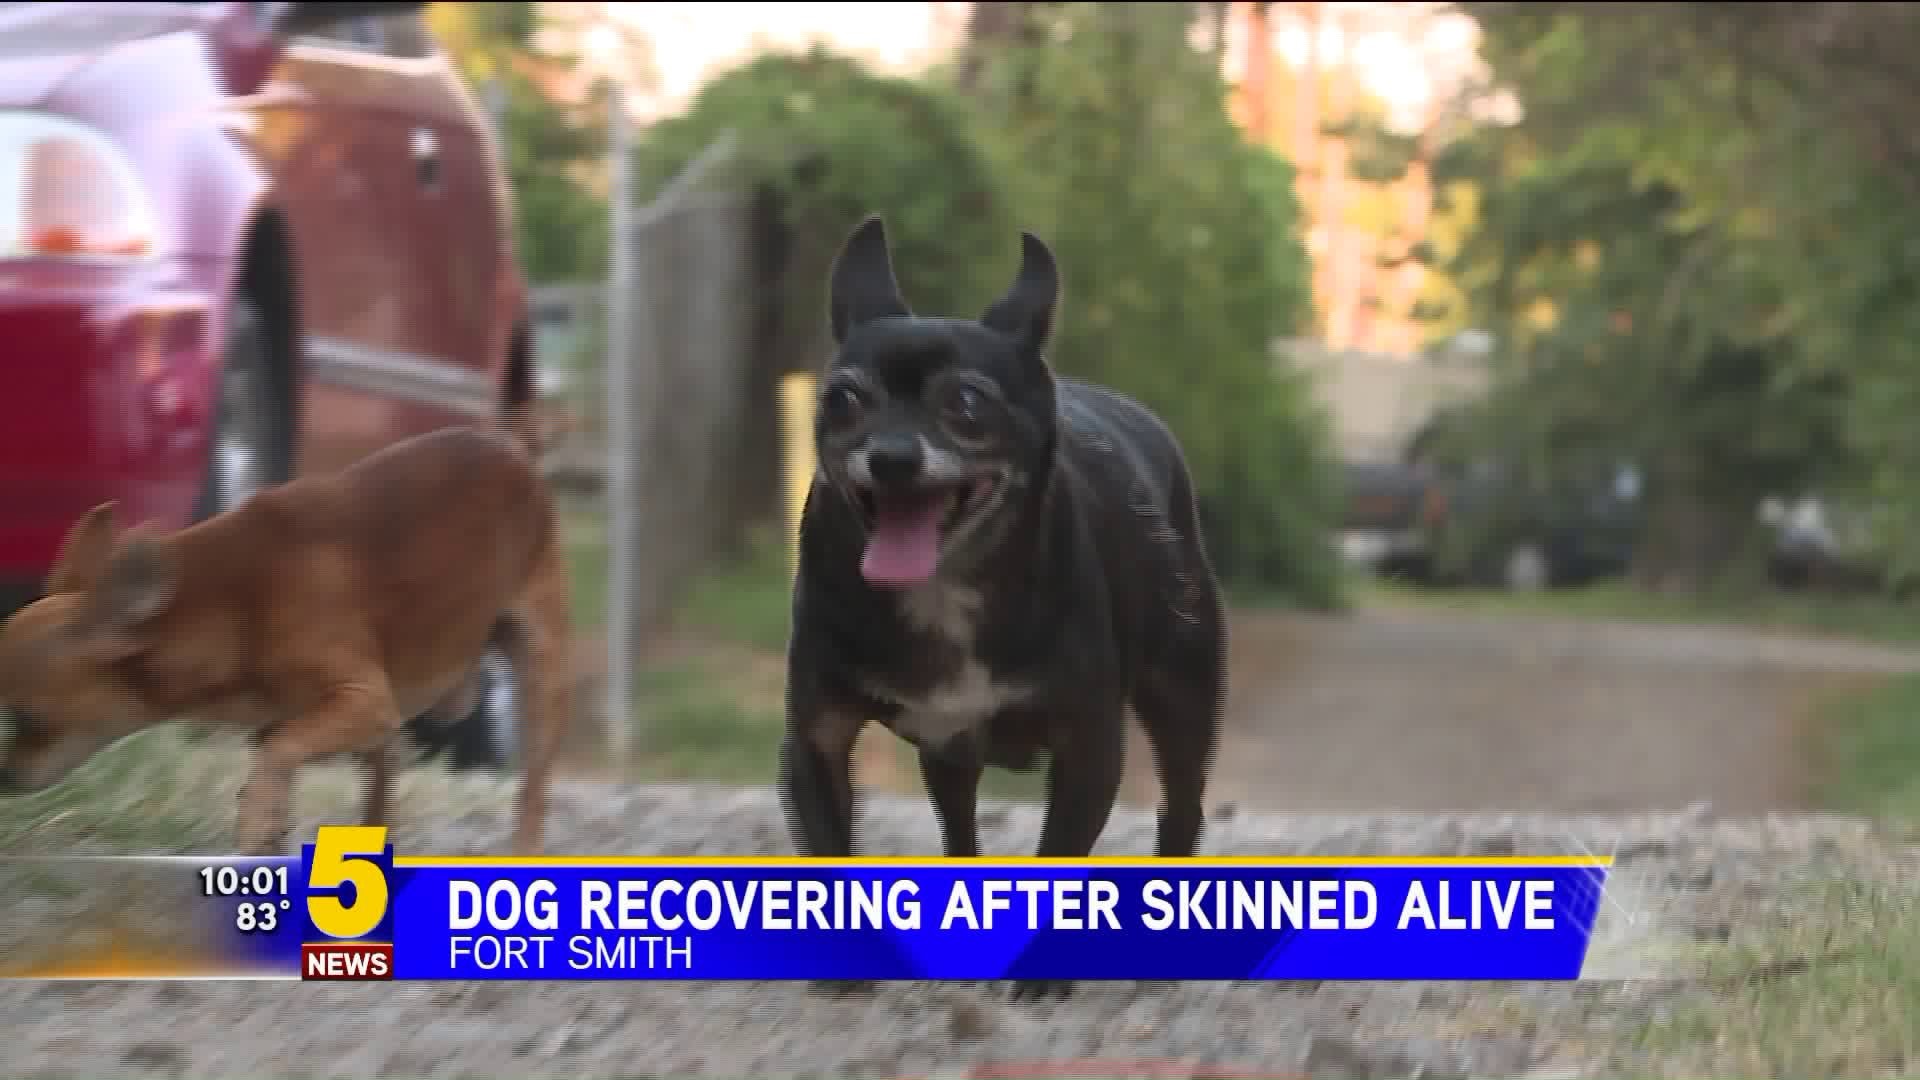 Dog Recovering After Being Skinned Alive In Fort Smith